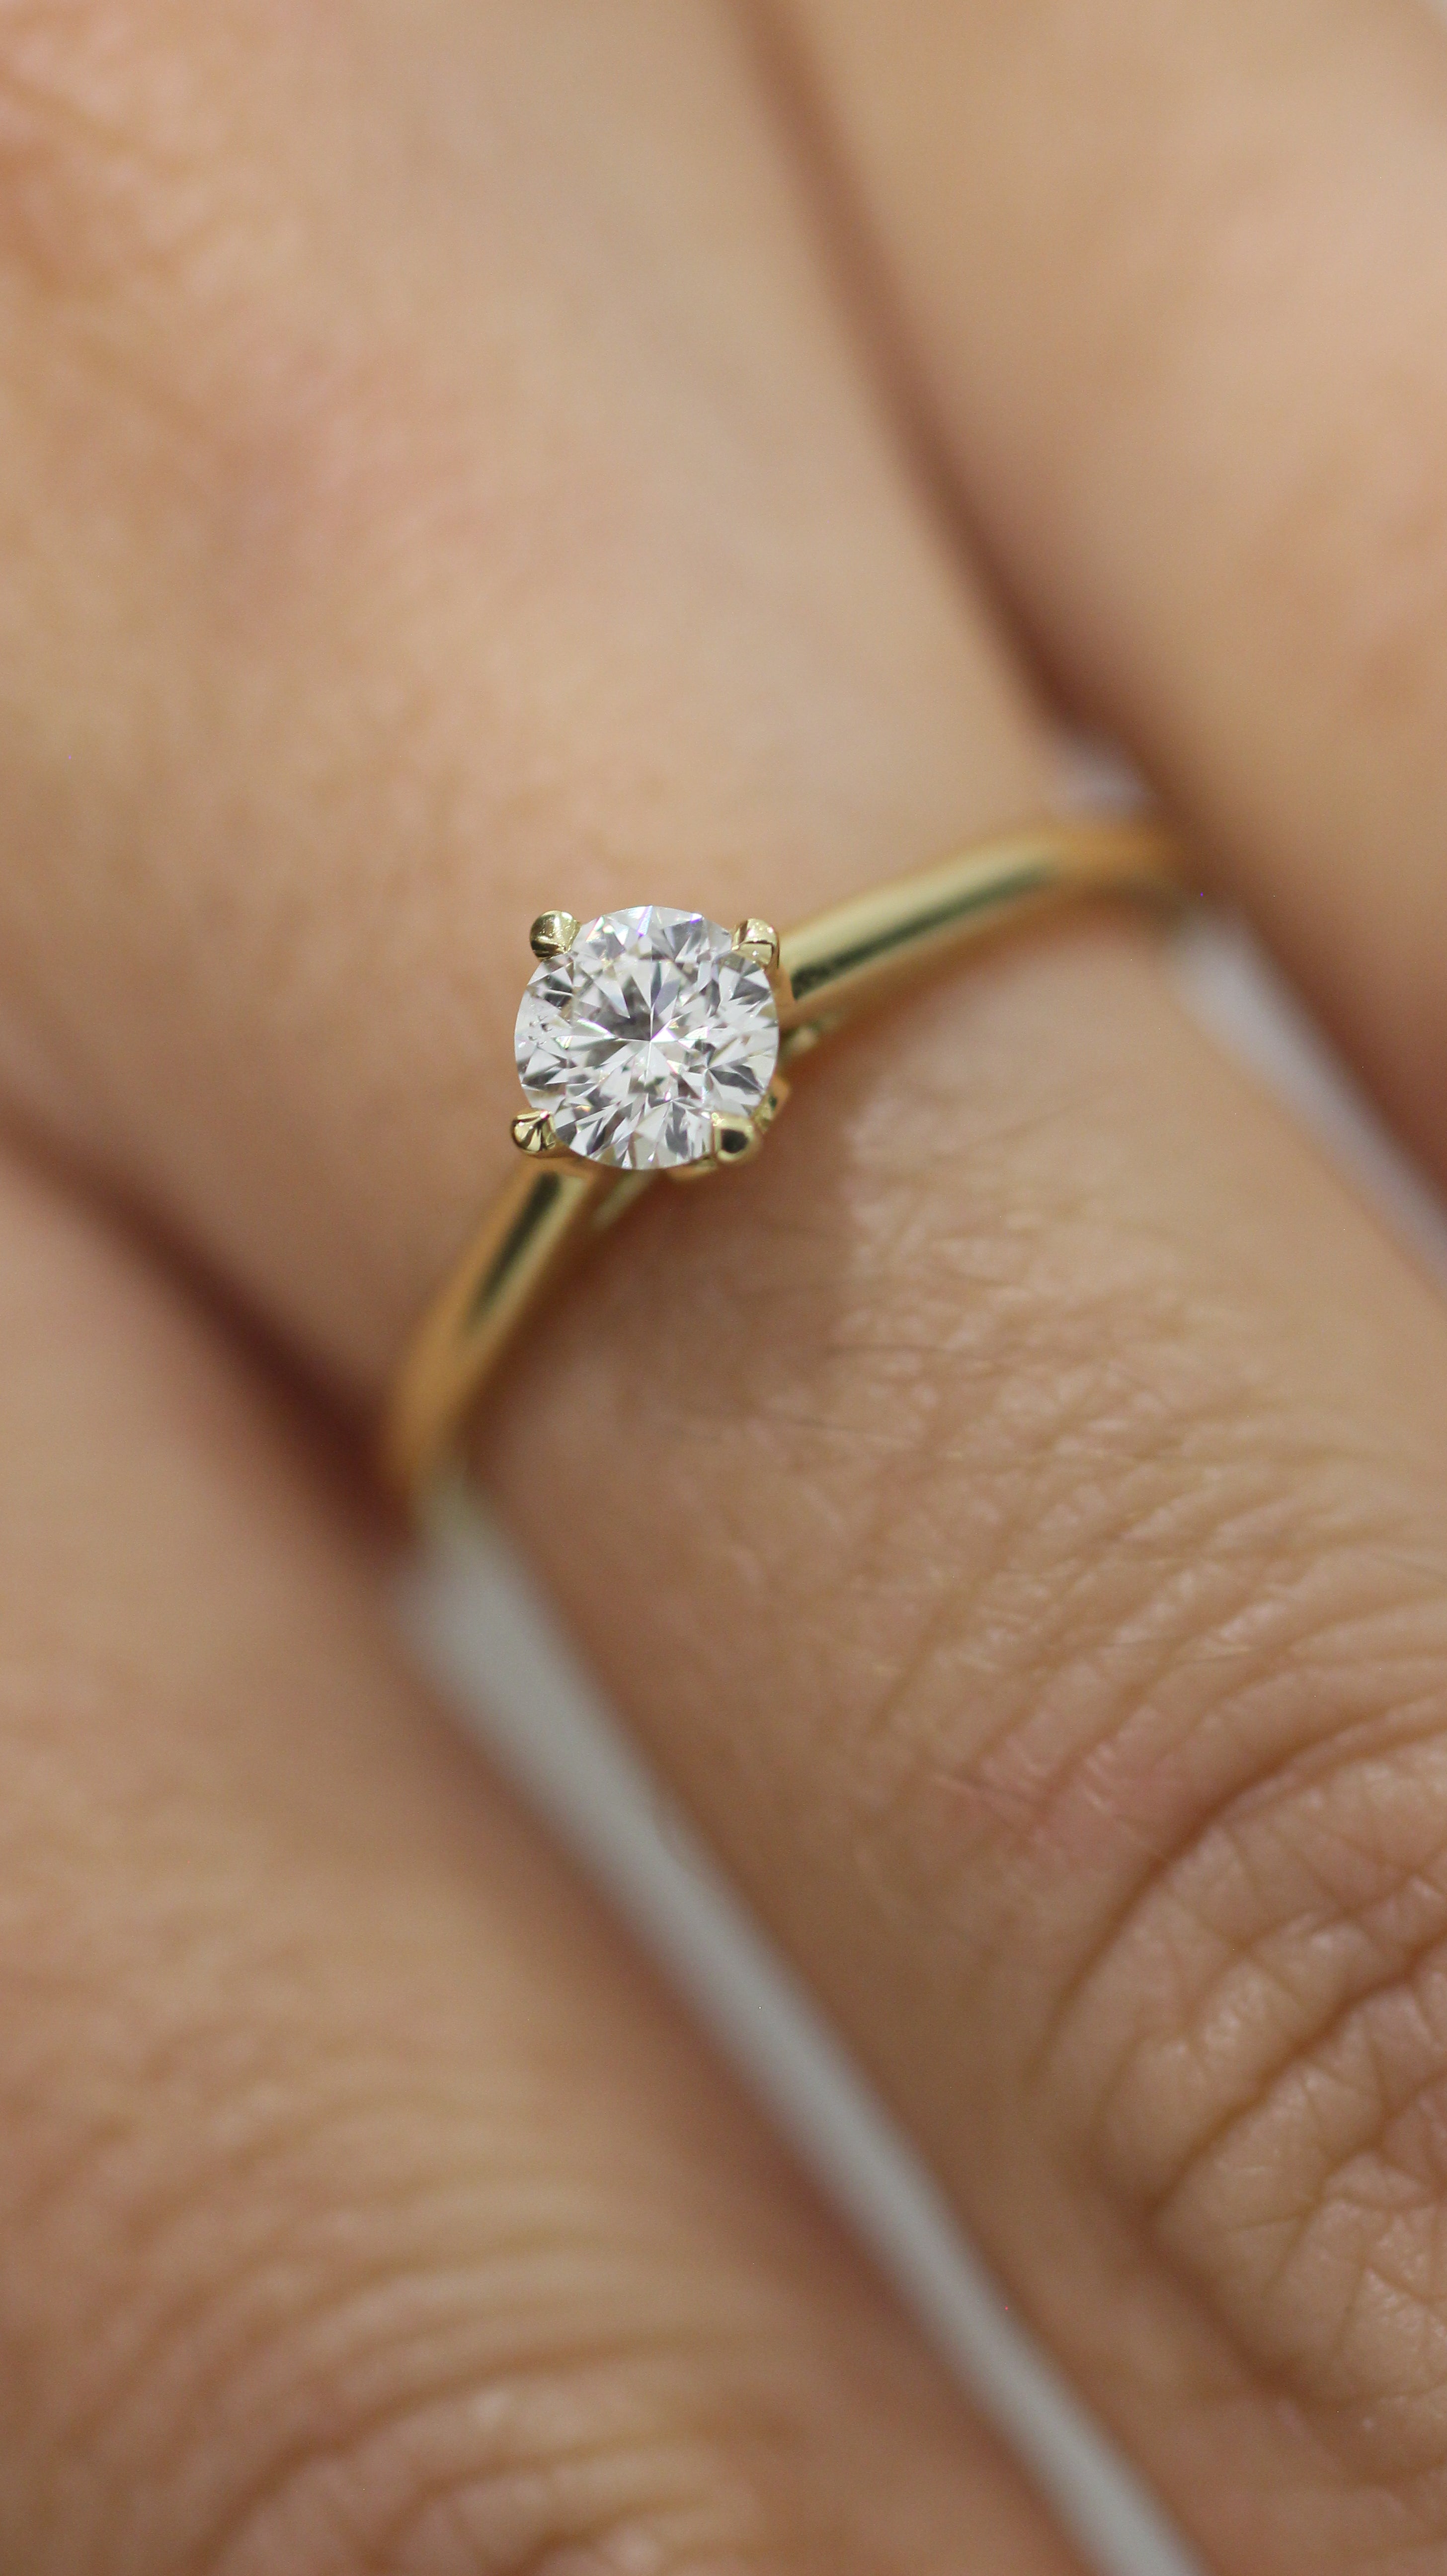 This 0.37ct G, SI, Excellent Cut Certified Diamond is a truly mesmerizing sight to behold! Set in a timeless 18K yellow Gold band with North/South/East/West prongs, this diamond is sure to make it's wearer feel as if they are in the clouds.